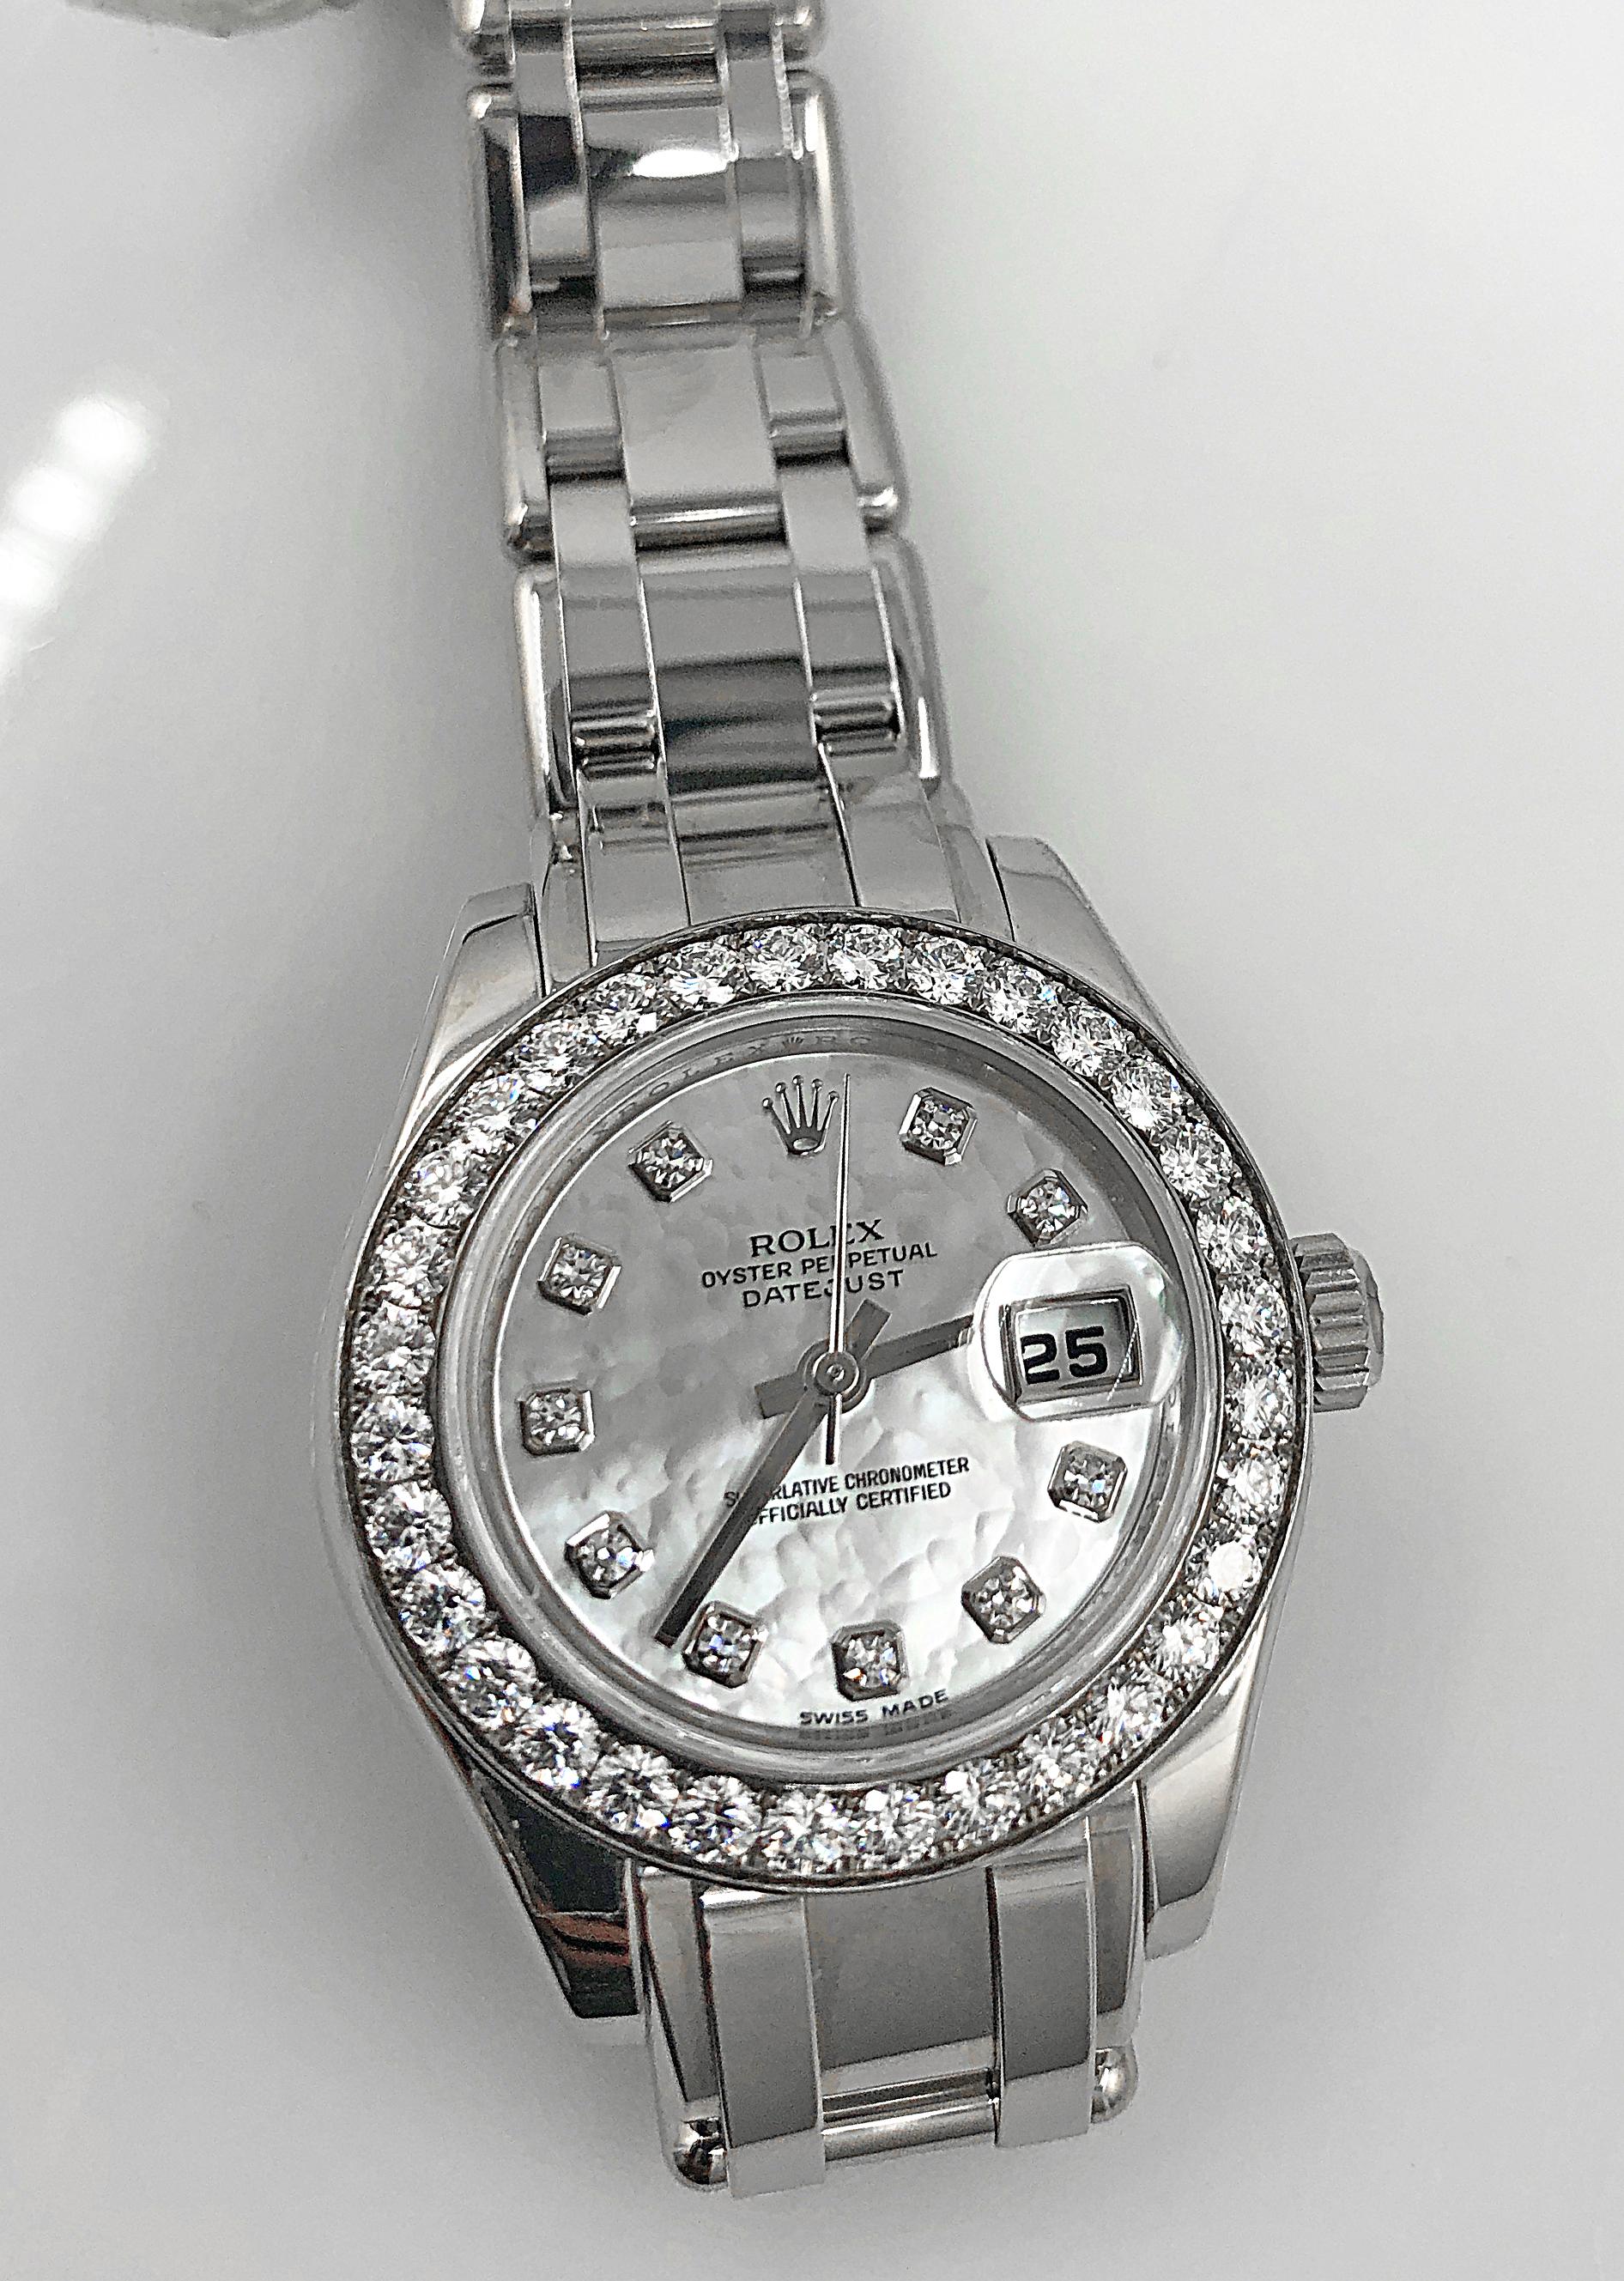 Rolex 18k white gold oyster perpetual Datejust diamond and mother of pearl women ladies watch.